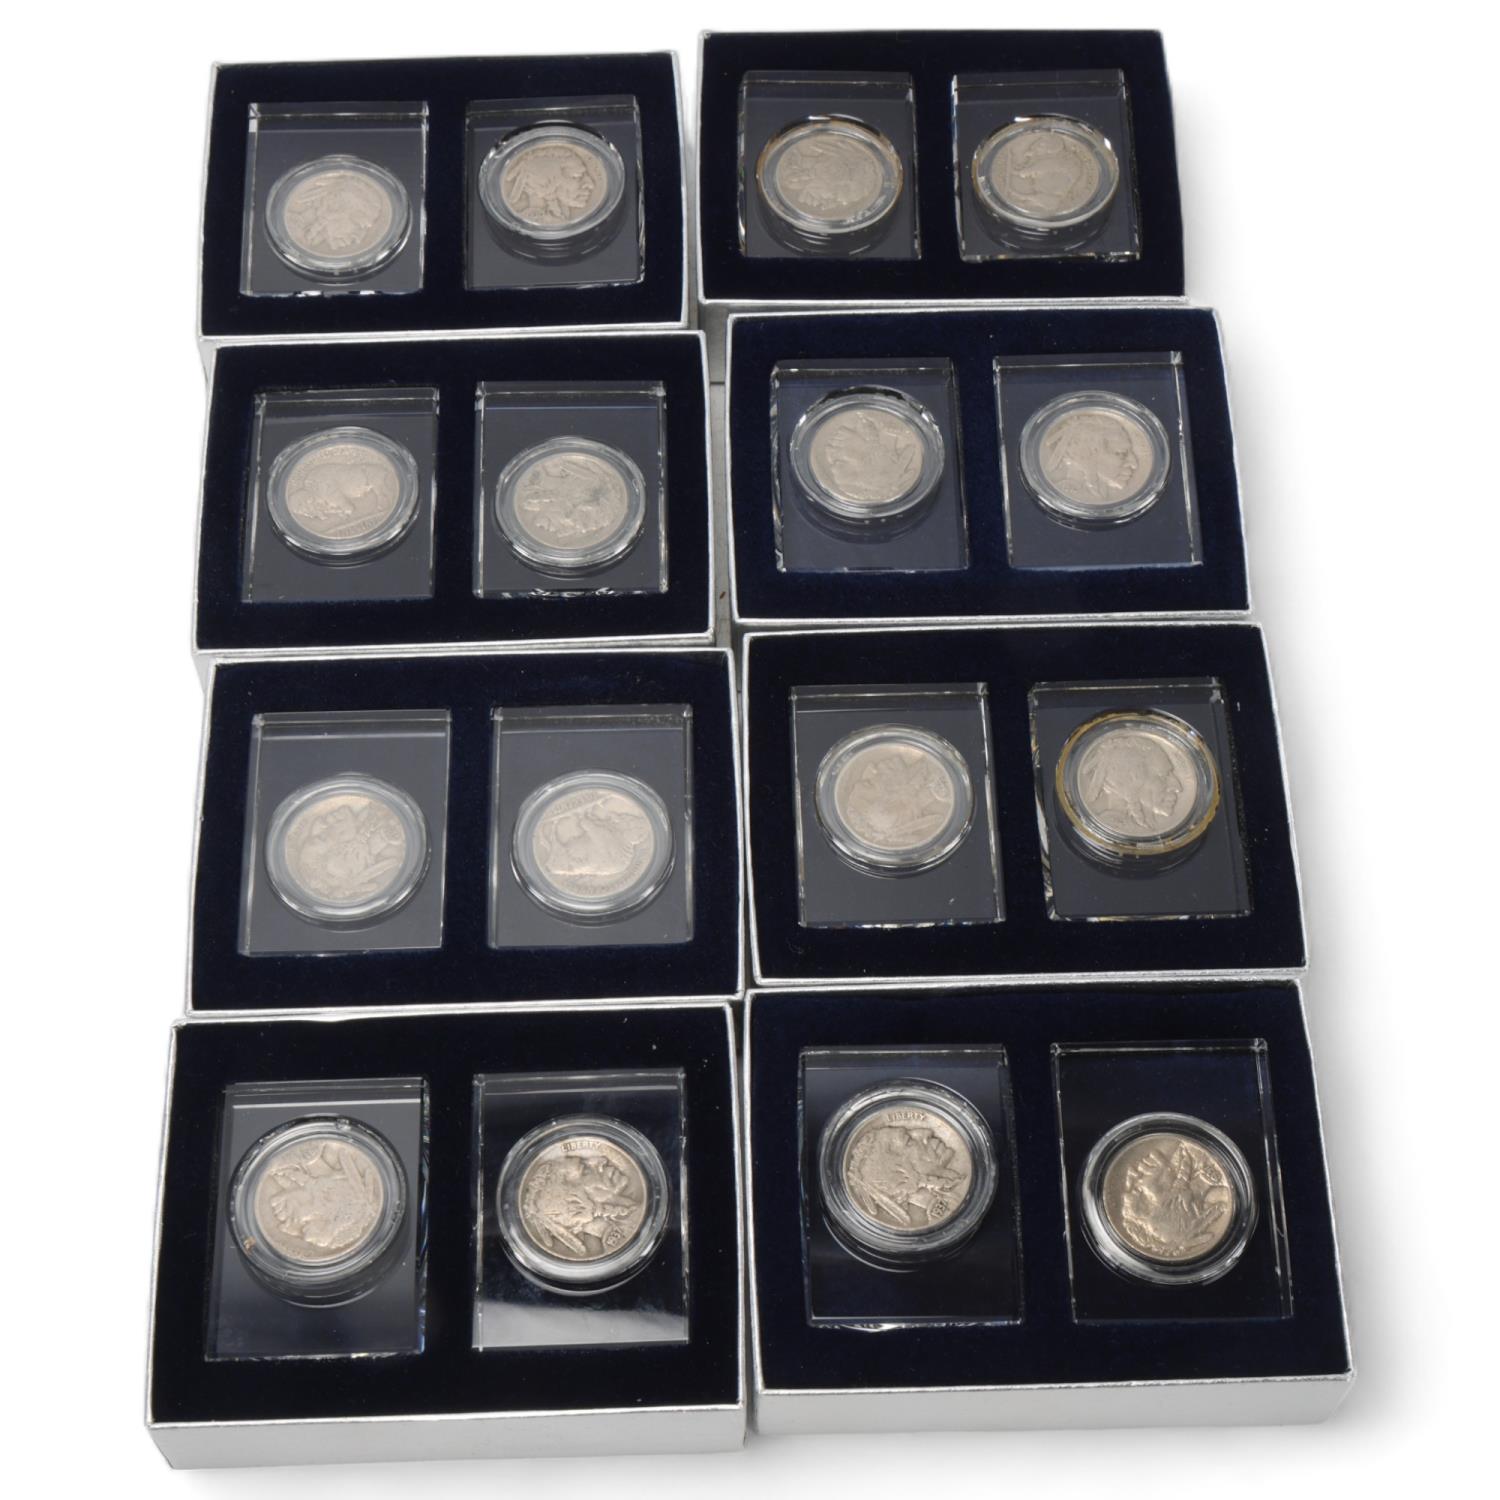 A group of American coins